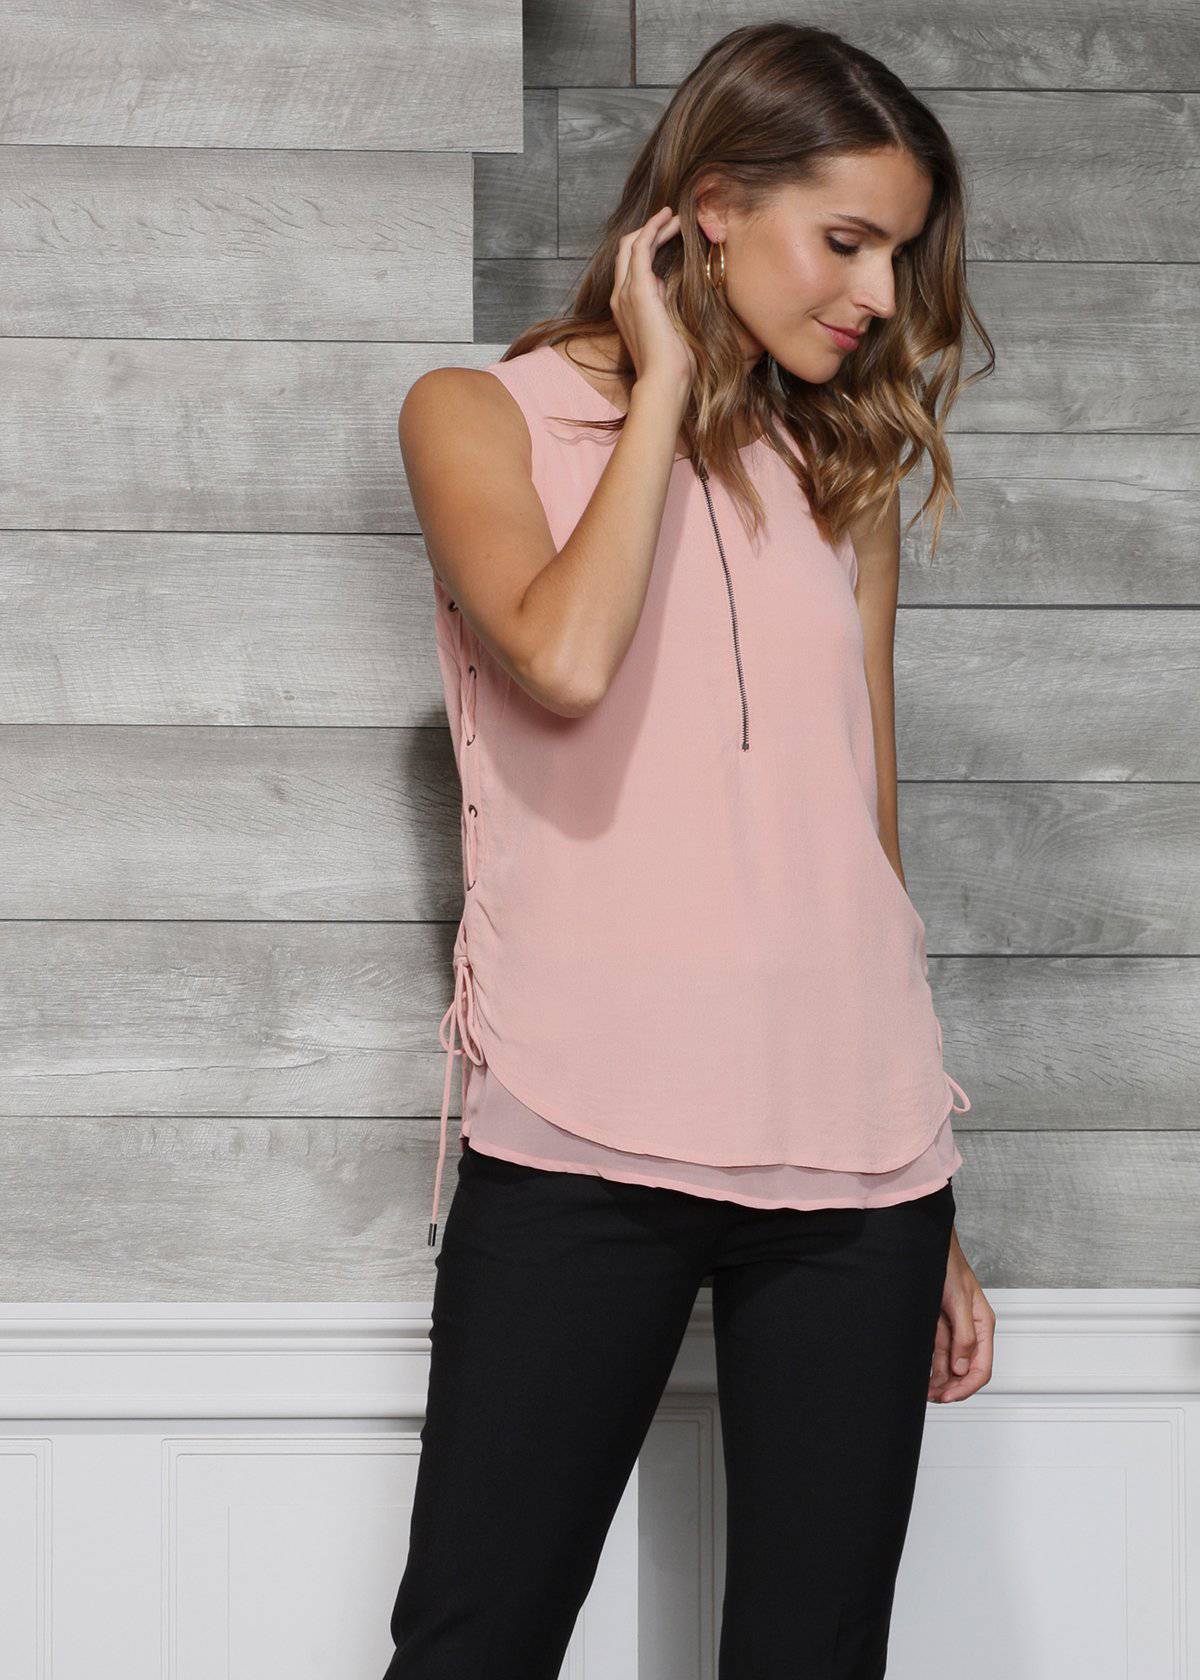 Women's Sleeveless Side Tie Blouse In Peach Apricot by Shop at Konus